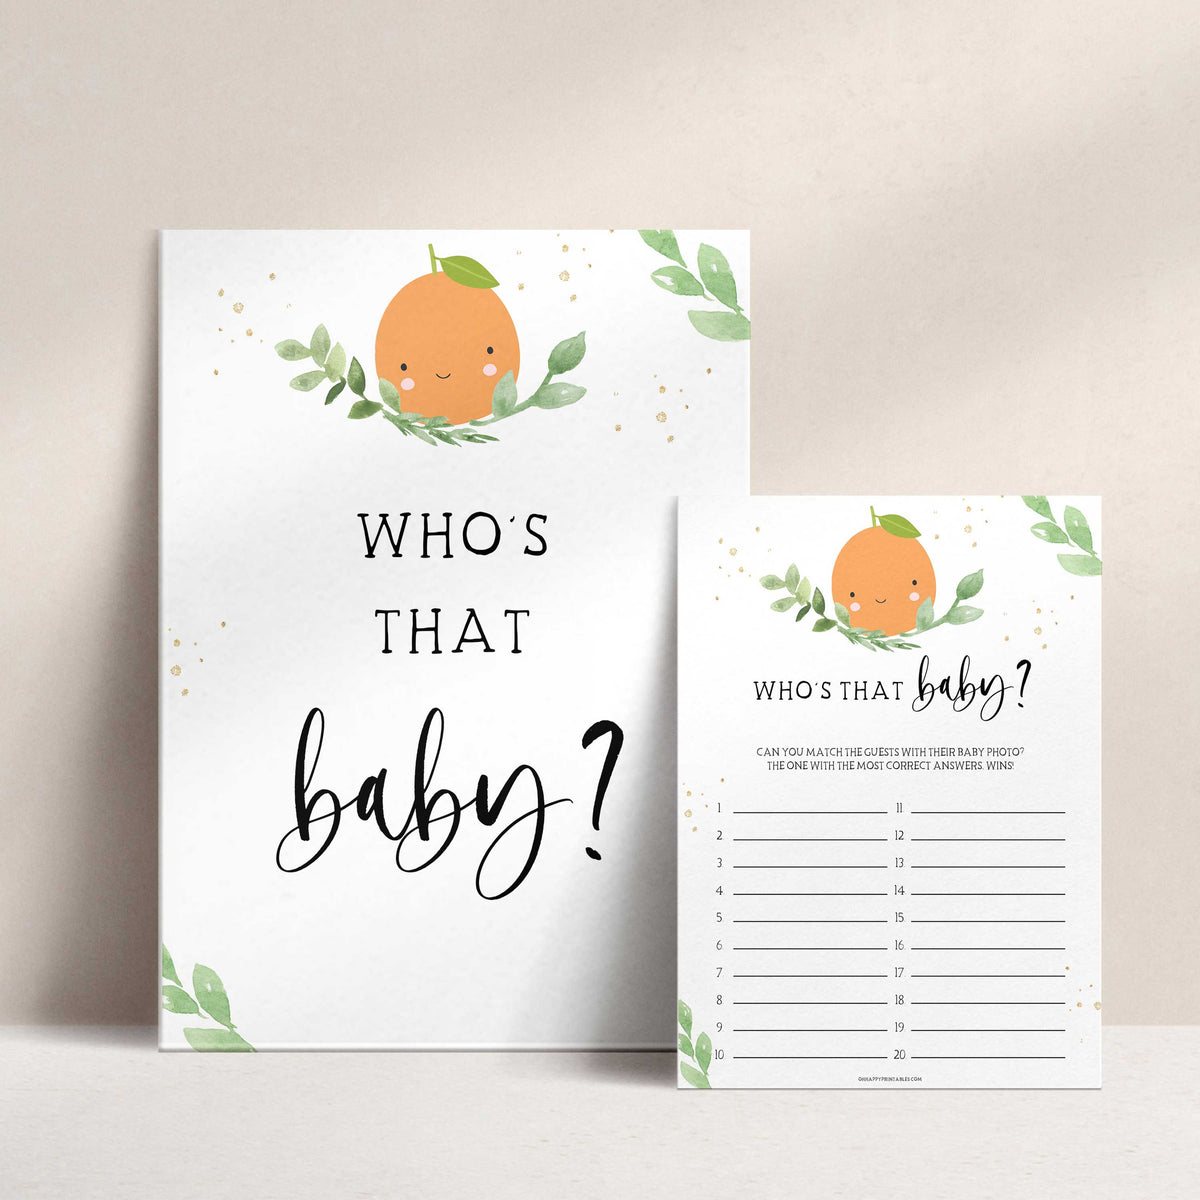 whos that baby game, Printable baby shower games, little cutie baby games, baby shower games, fun baby shower ideas, top baby shower ideas, little cutie baby shower, baby shower games, fun little cutie baby shower ideas